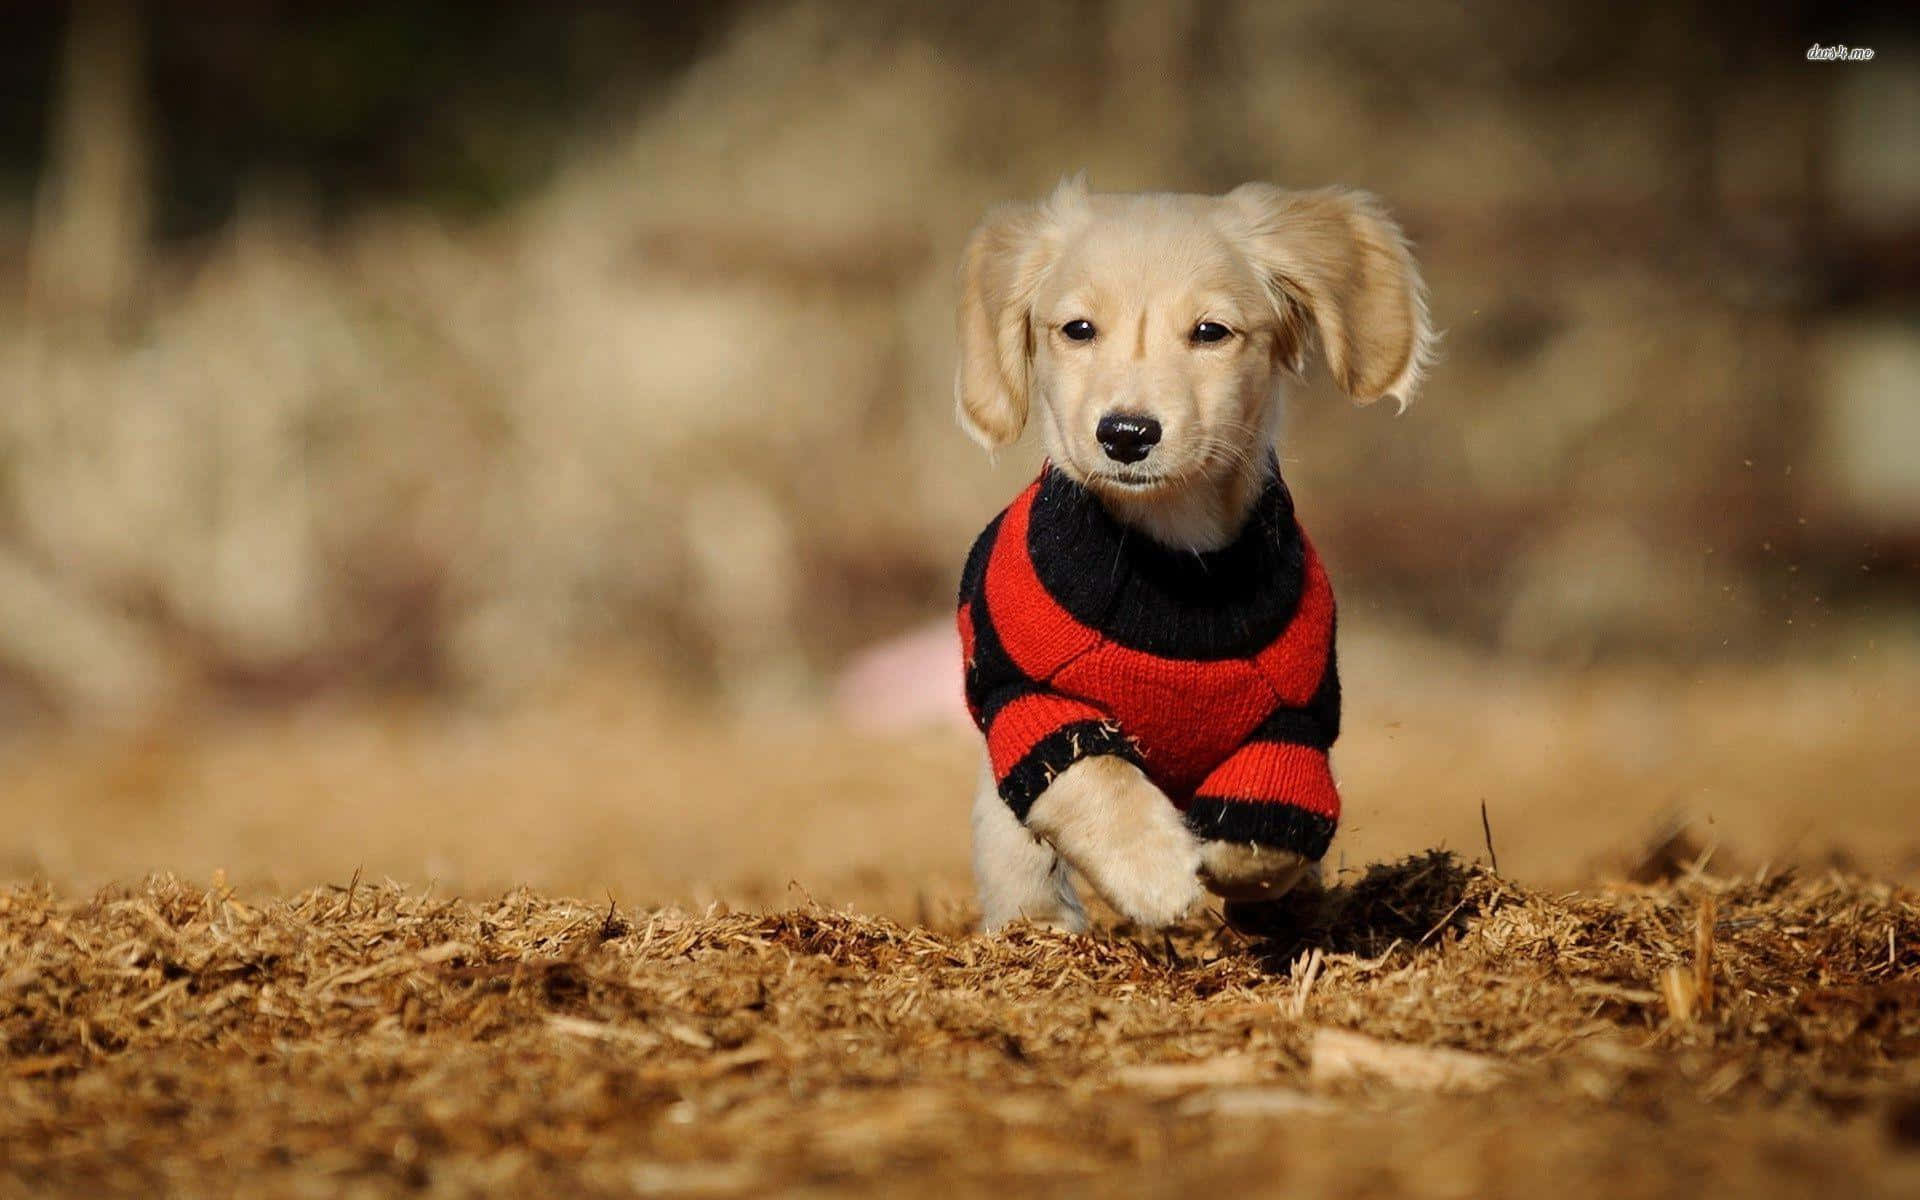 This Cute, Lovable Dachshund Is Sure To Make You Smile! Wallpaper